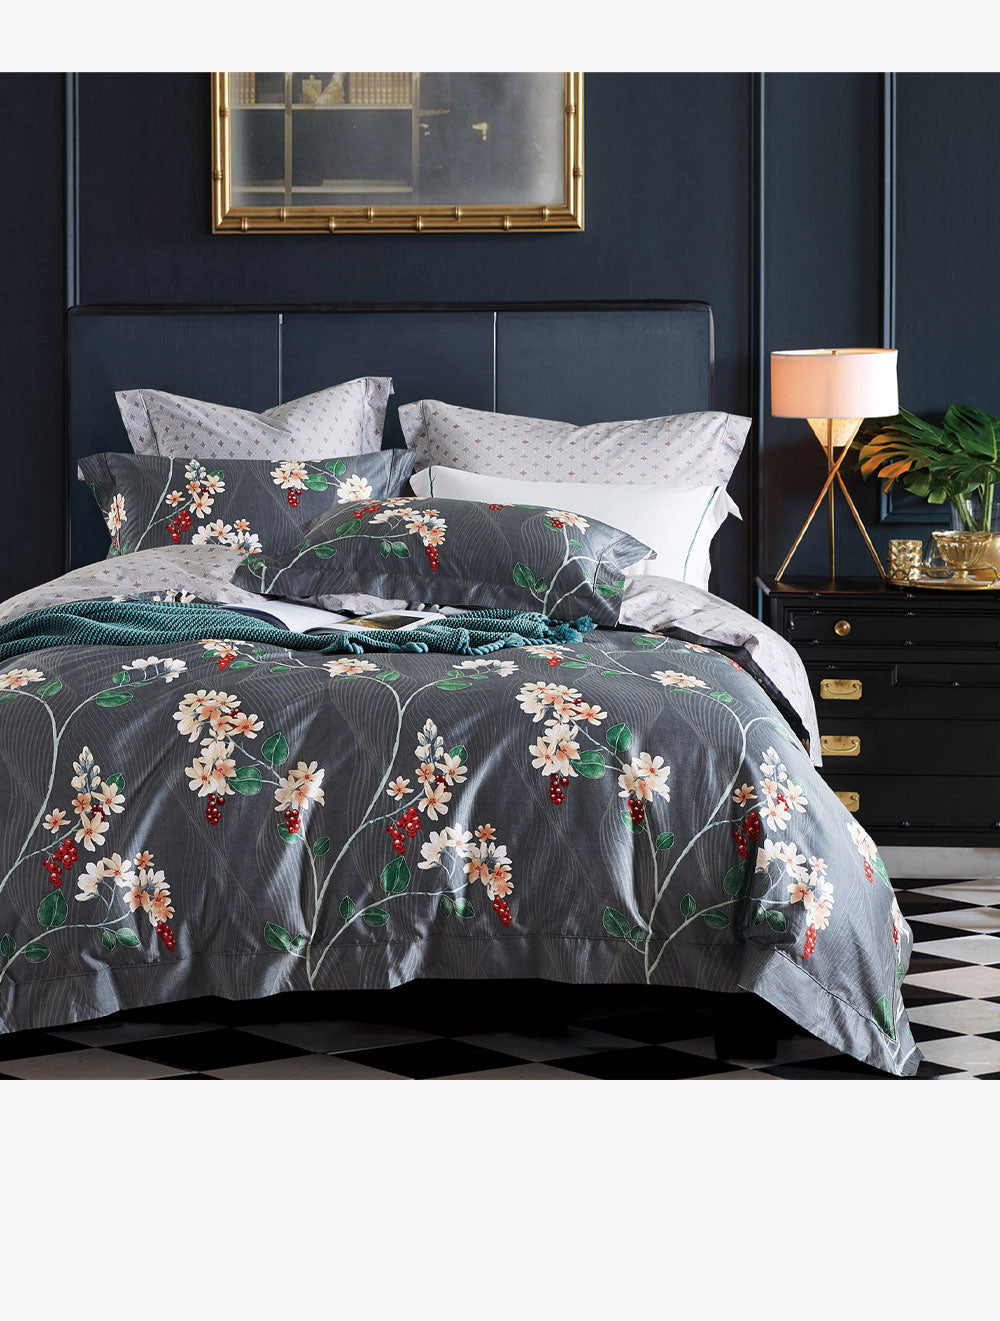 TUFT & QUILT BLOOMING BERRIES FITTED SHEET SET 200 CM X 200 CM